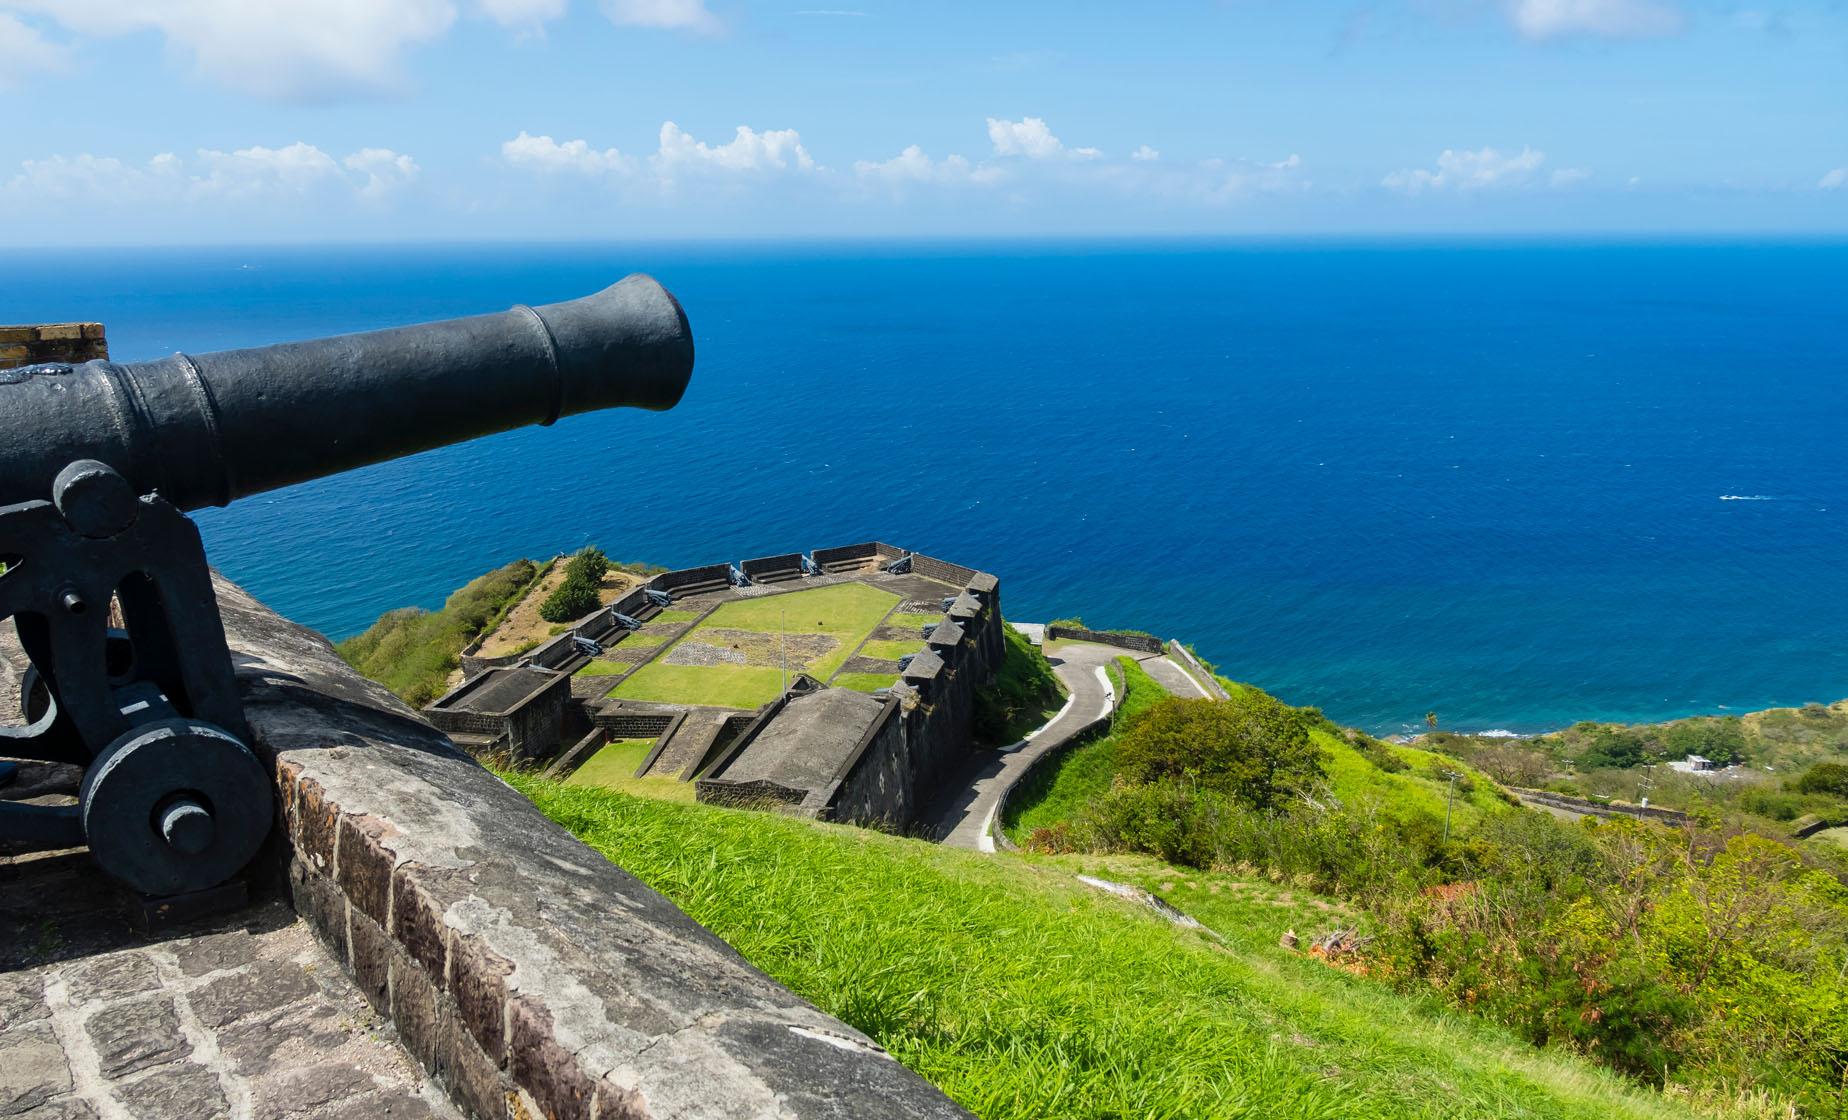 Low Prices on Best of St. Kitts Tour in Basseterre